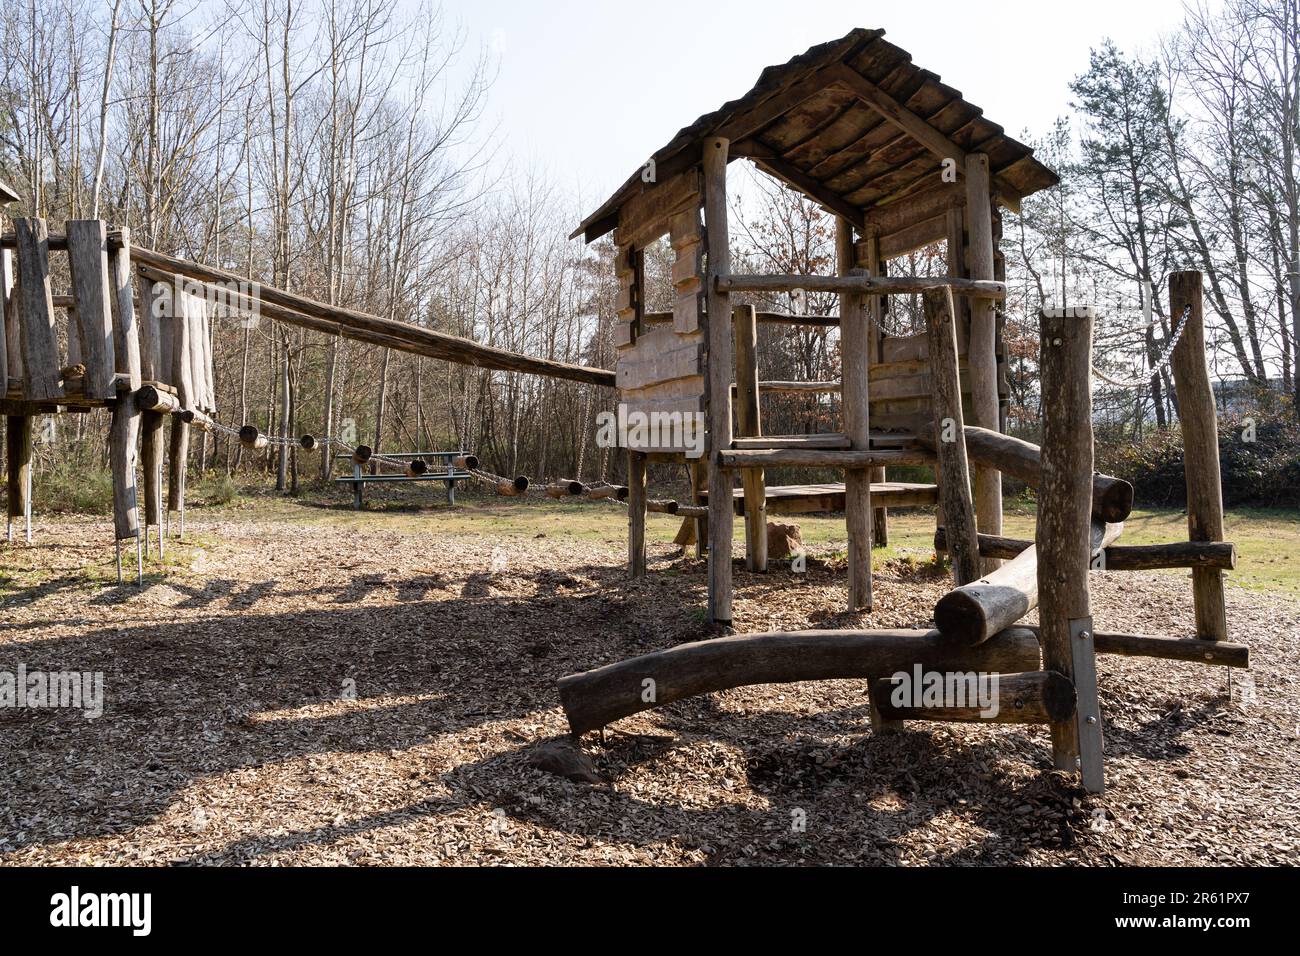 Playground for children with a wooden play house and a bridge in the nature park Stock Photo